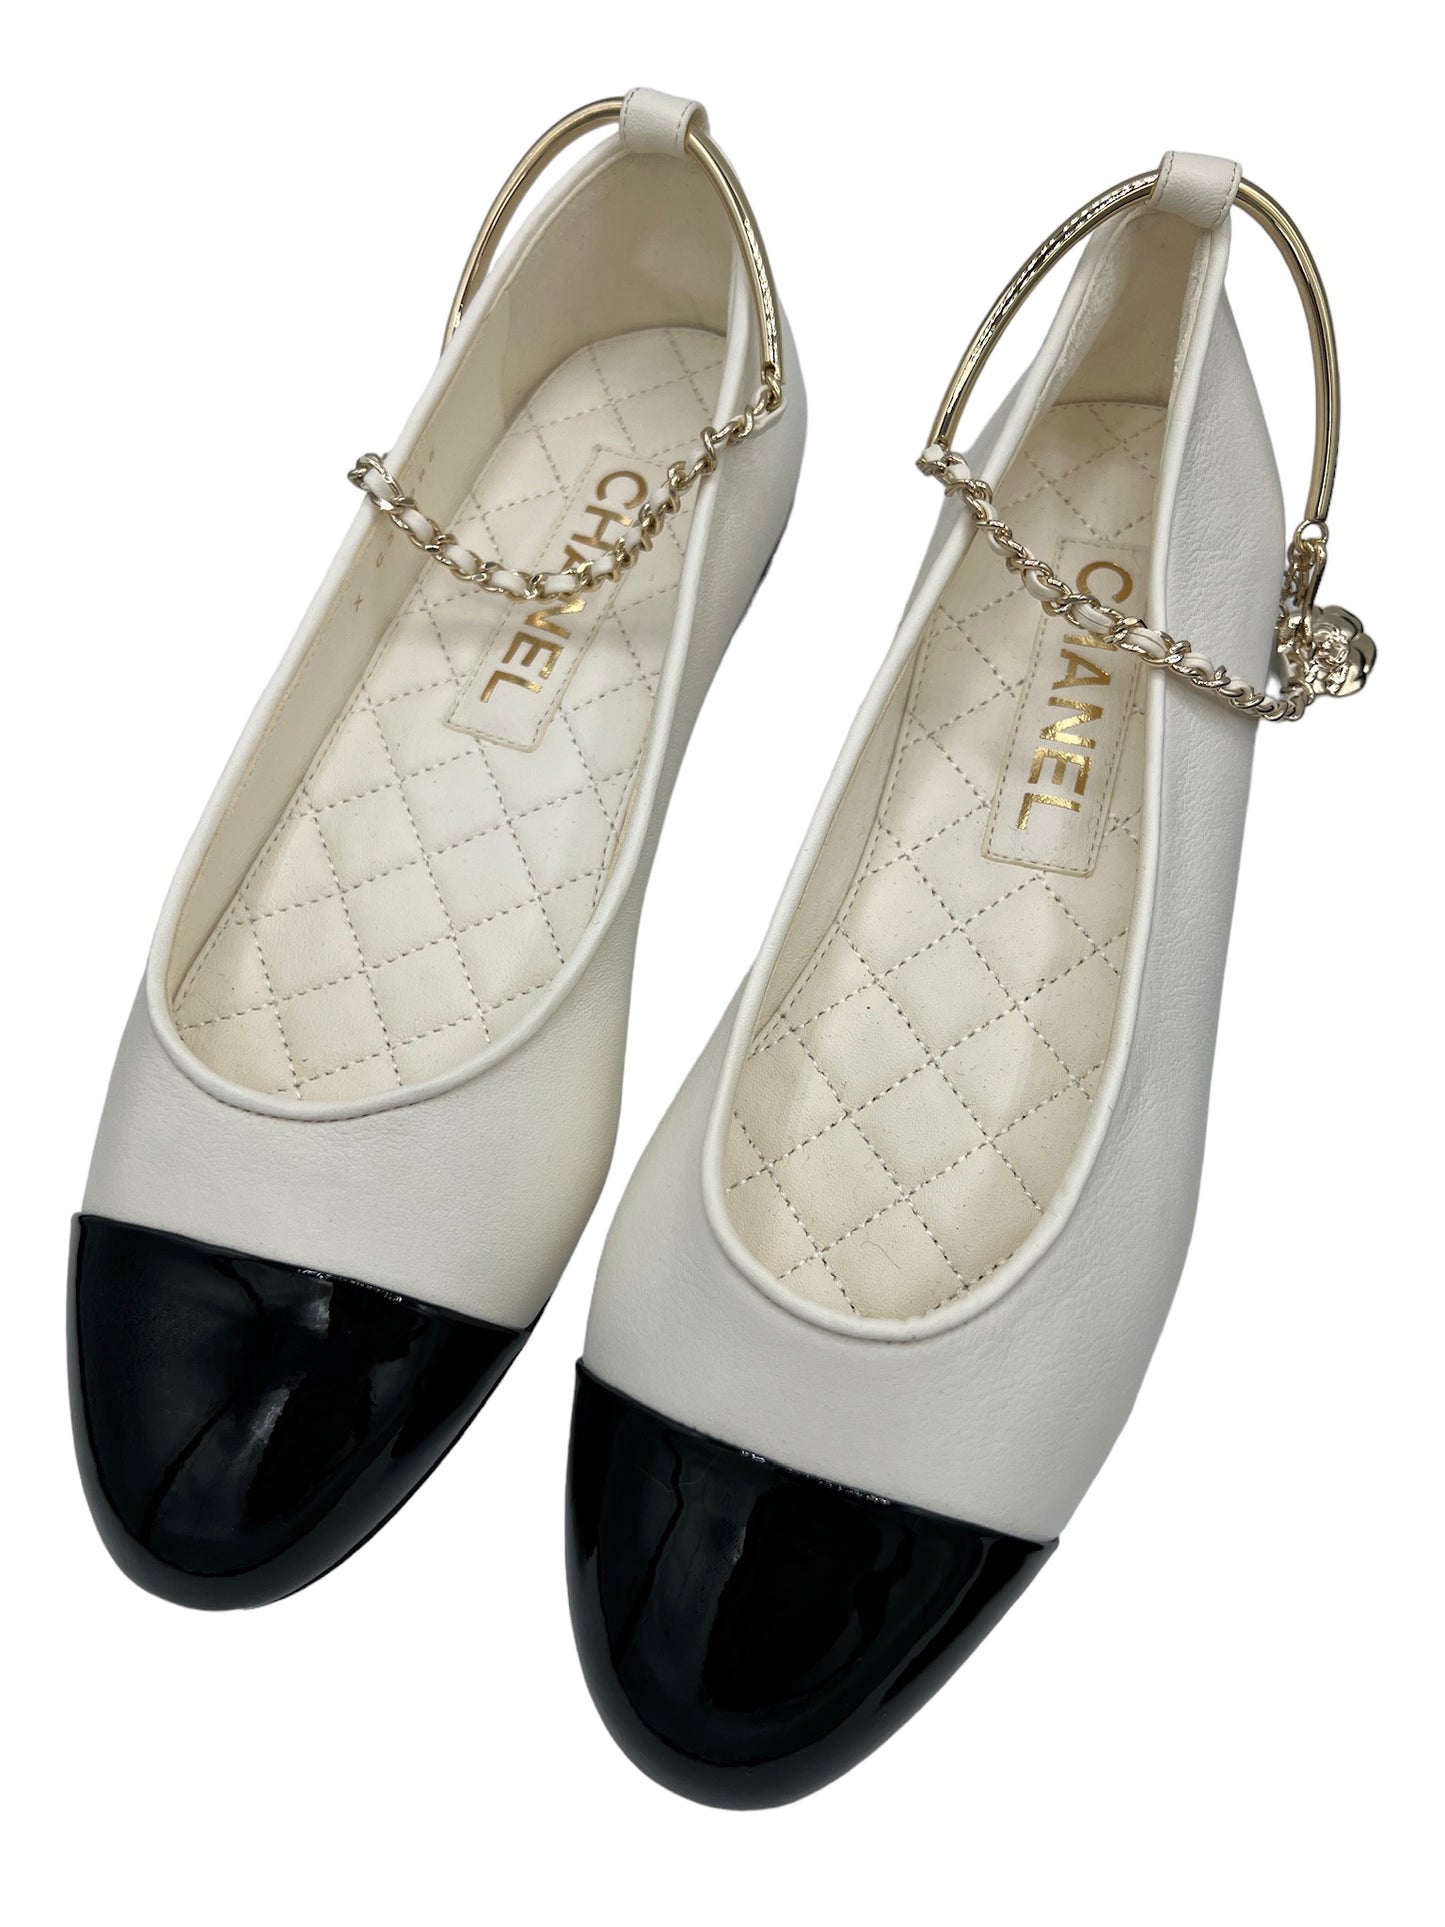 CHANEL - White Patent Ballerina Shoes